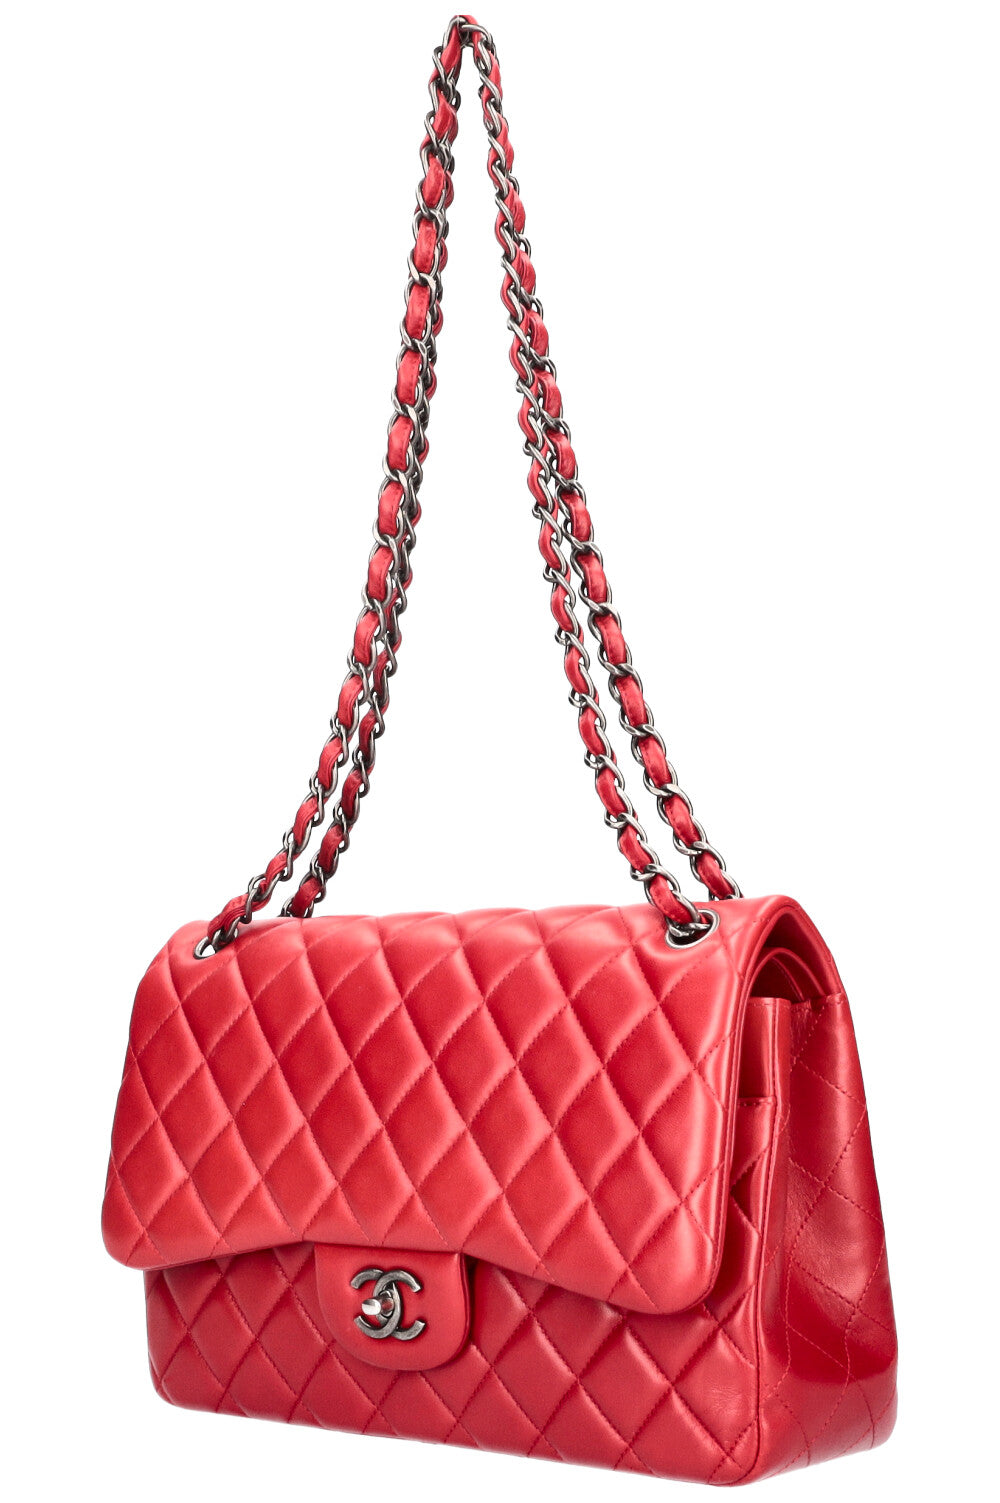 CHANEL Large Double Flap Bag Lambskin Red